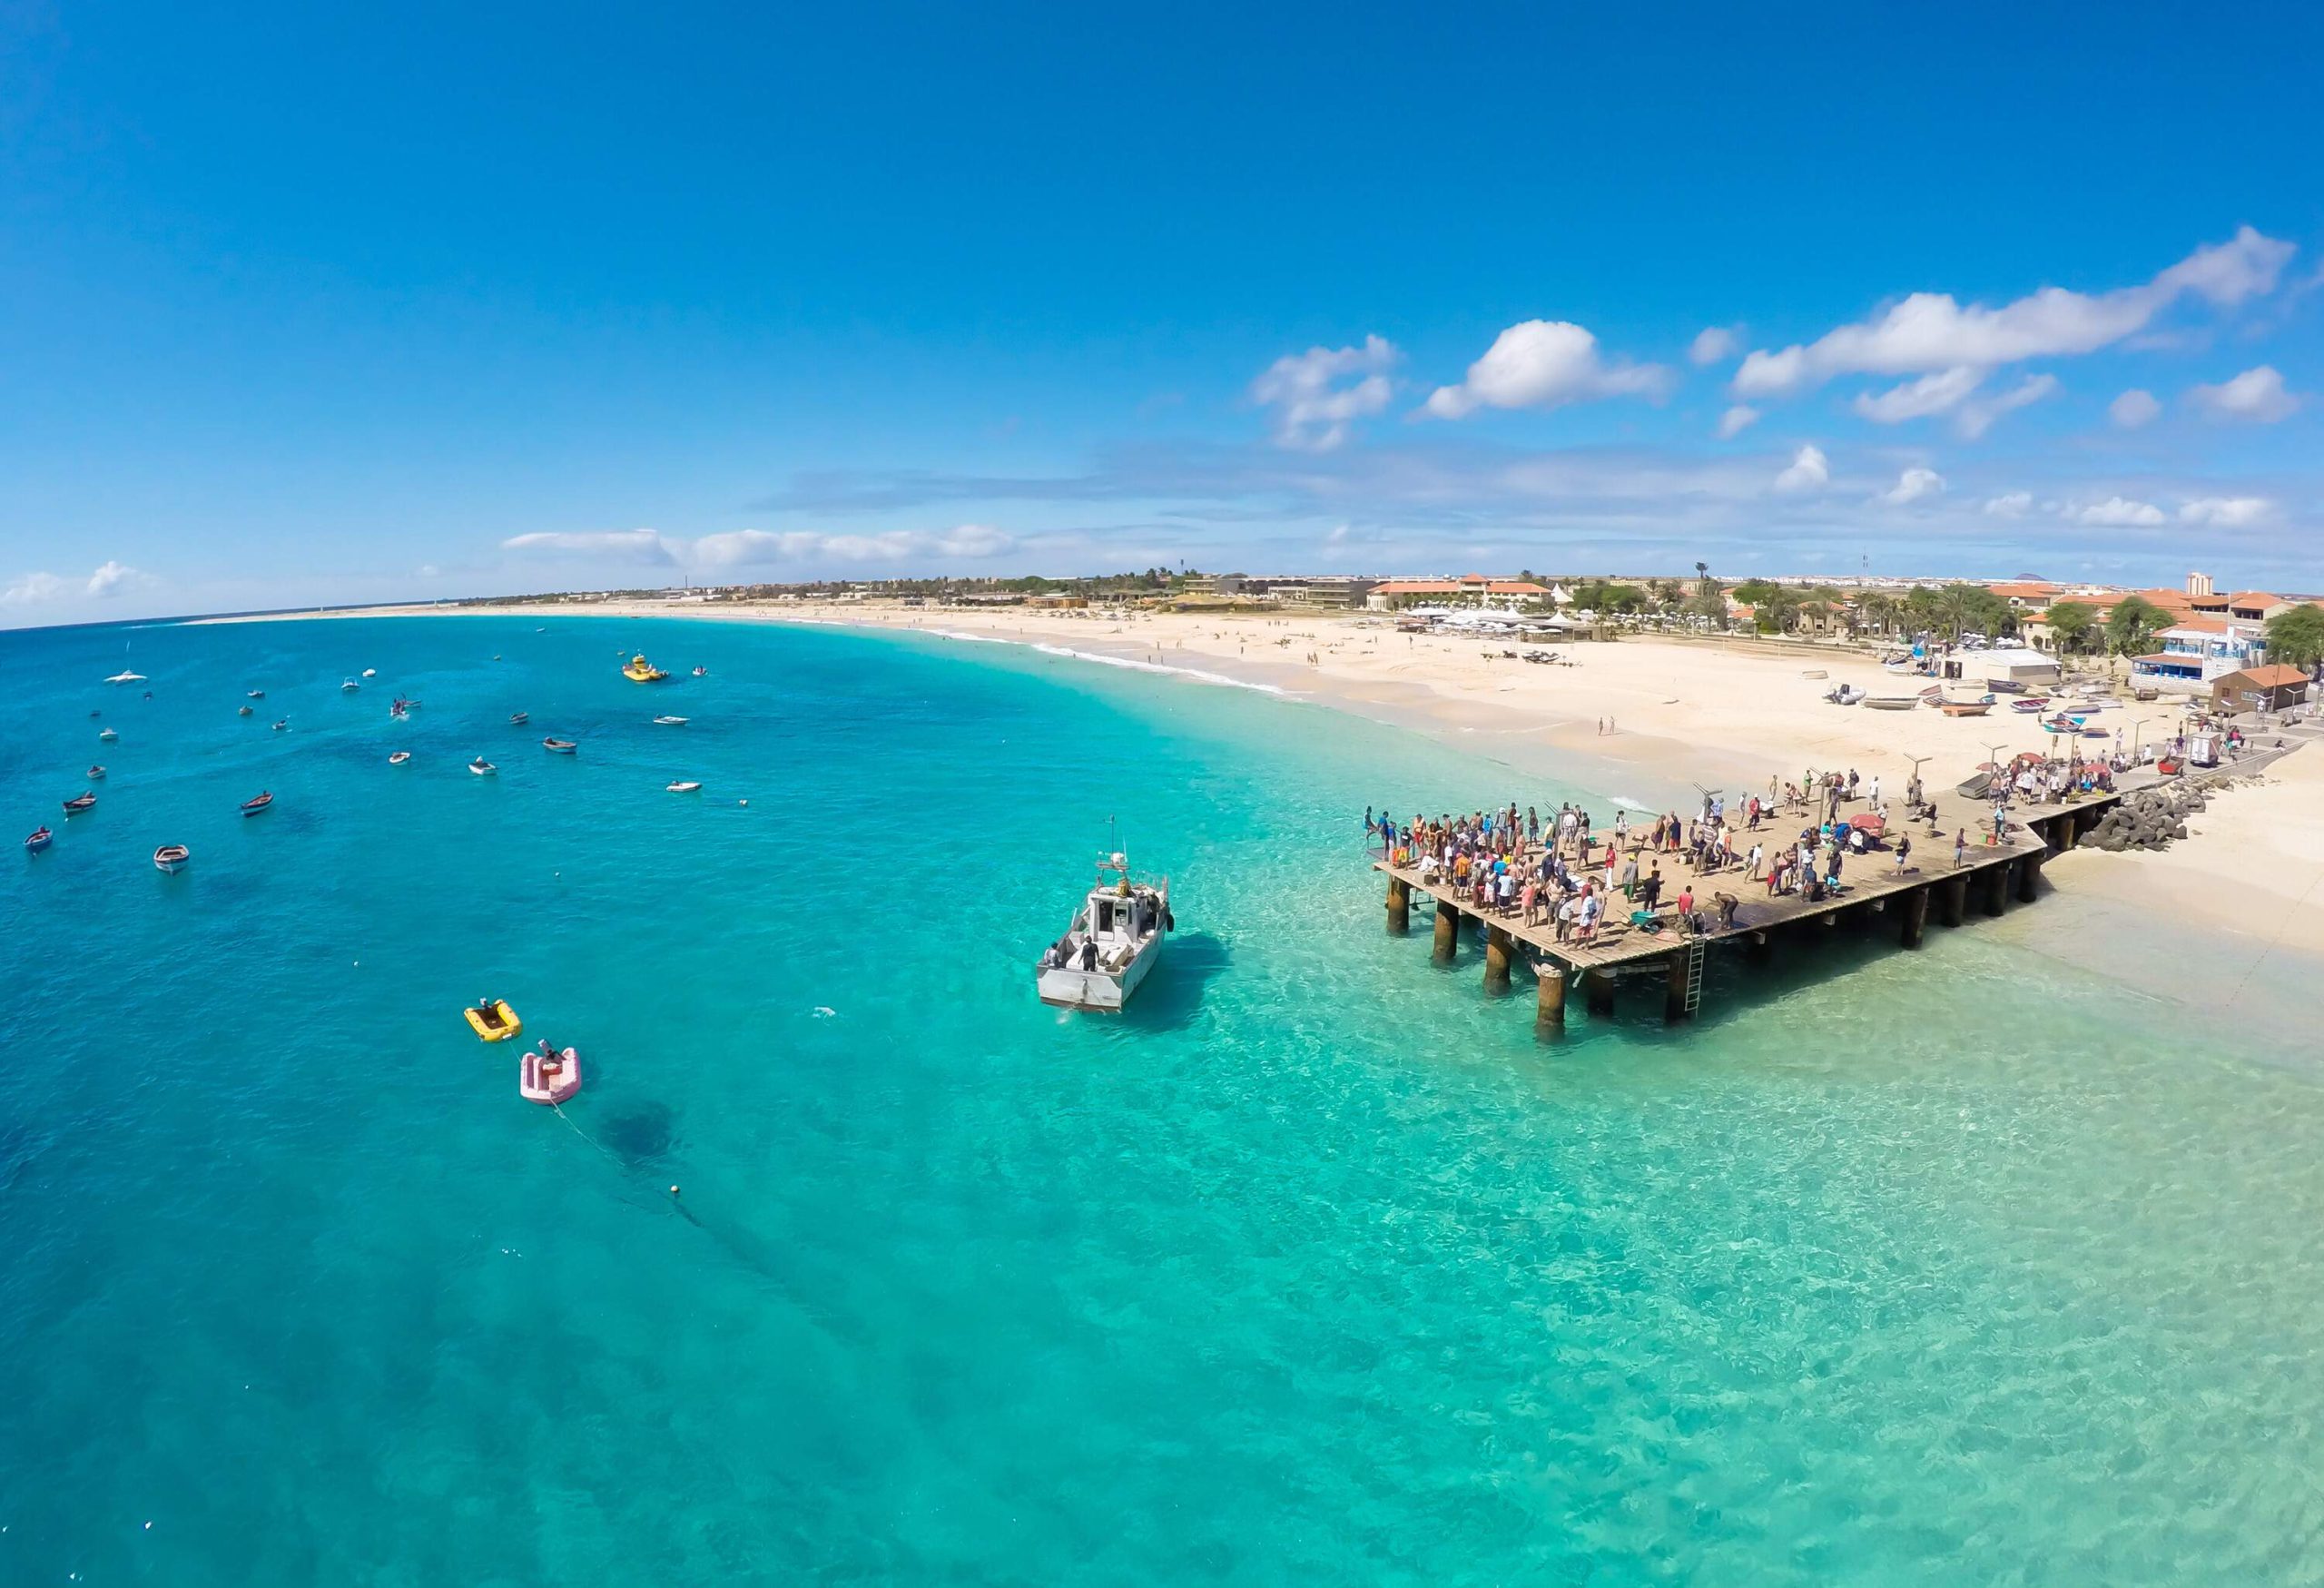 A crowded pier on a turquoise beach with floating boats.